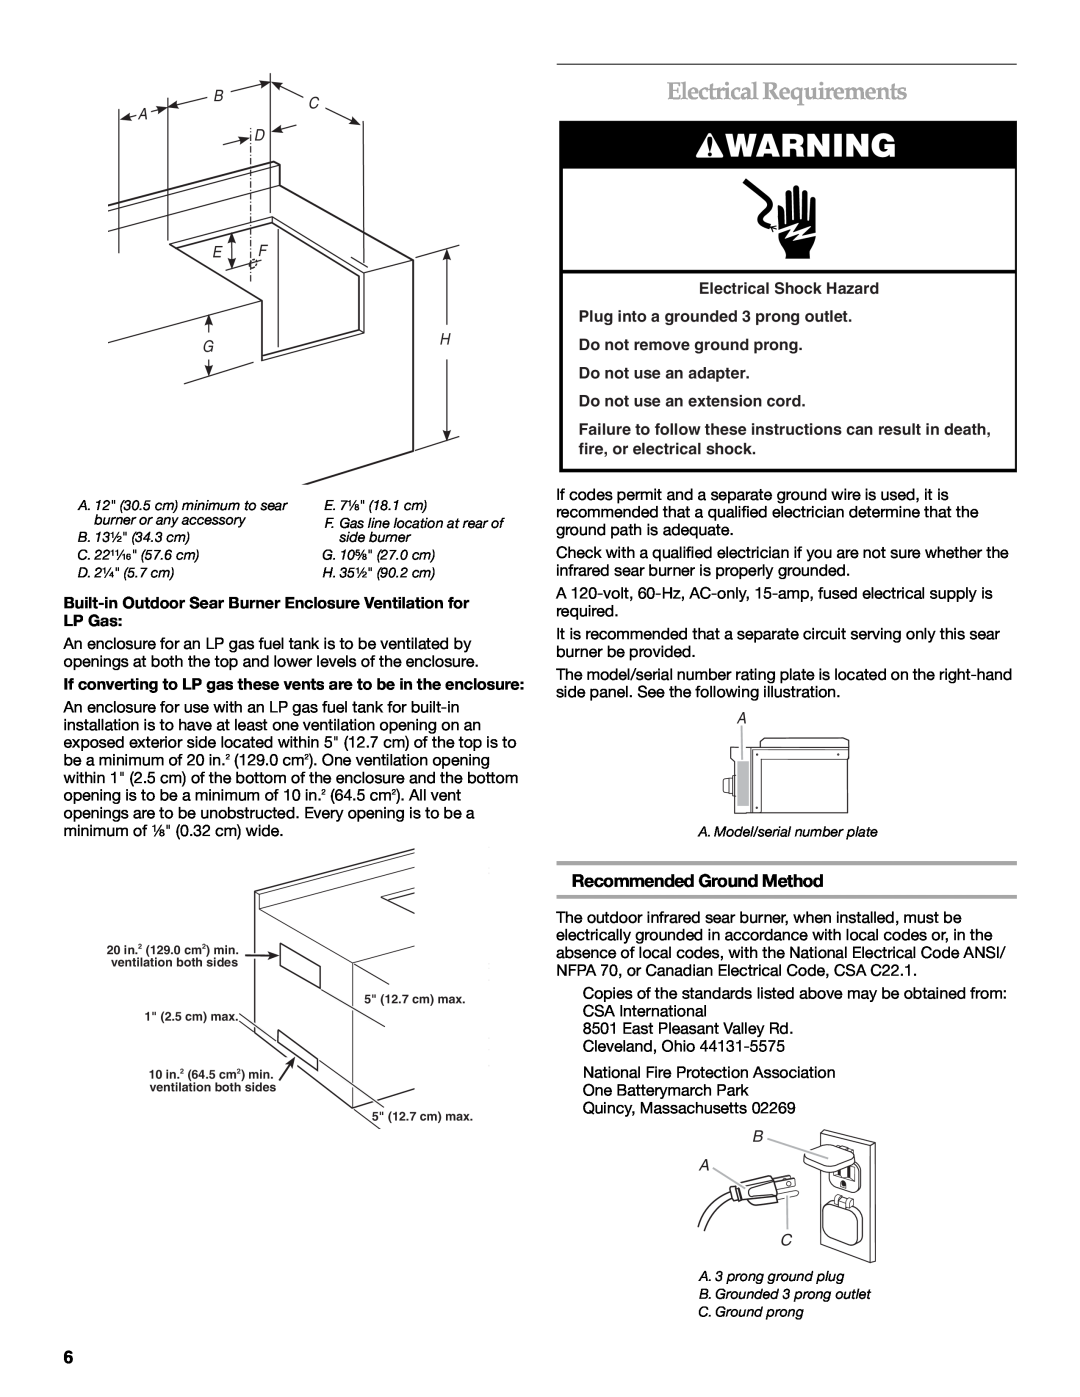 KitchenAid KBEU121T installation instructions ElectricalRequirements, Recommended Ground Method, B A D E F G, B A C 